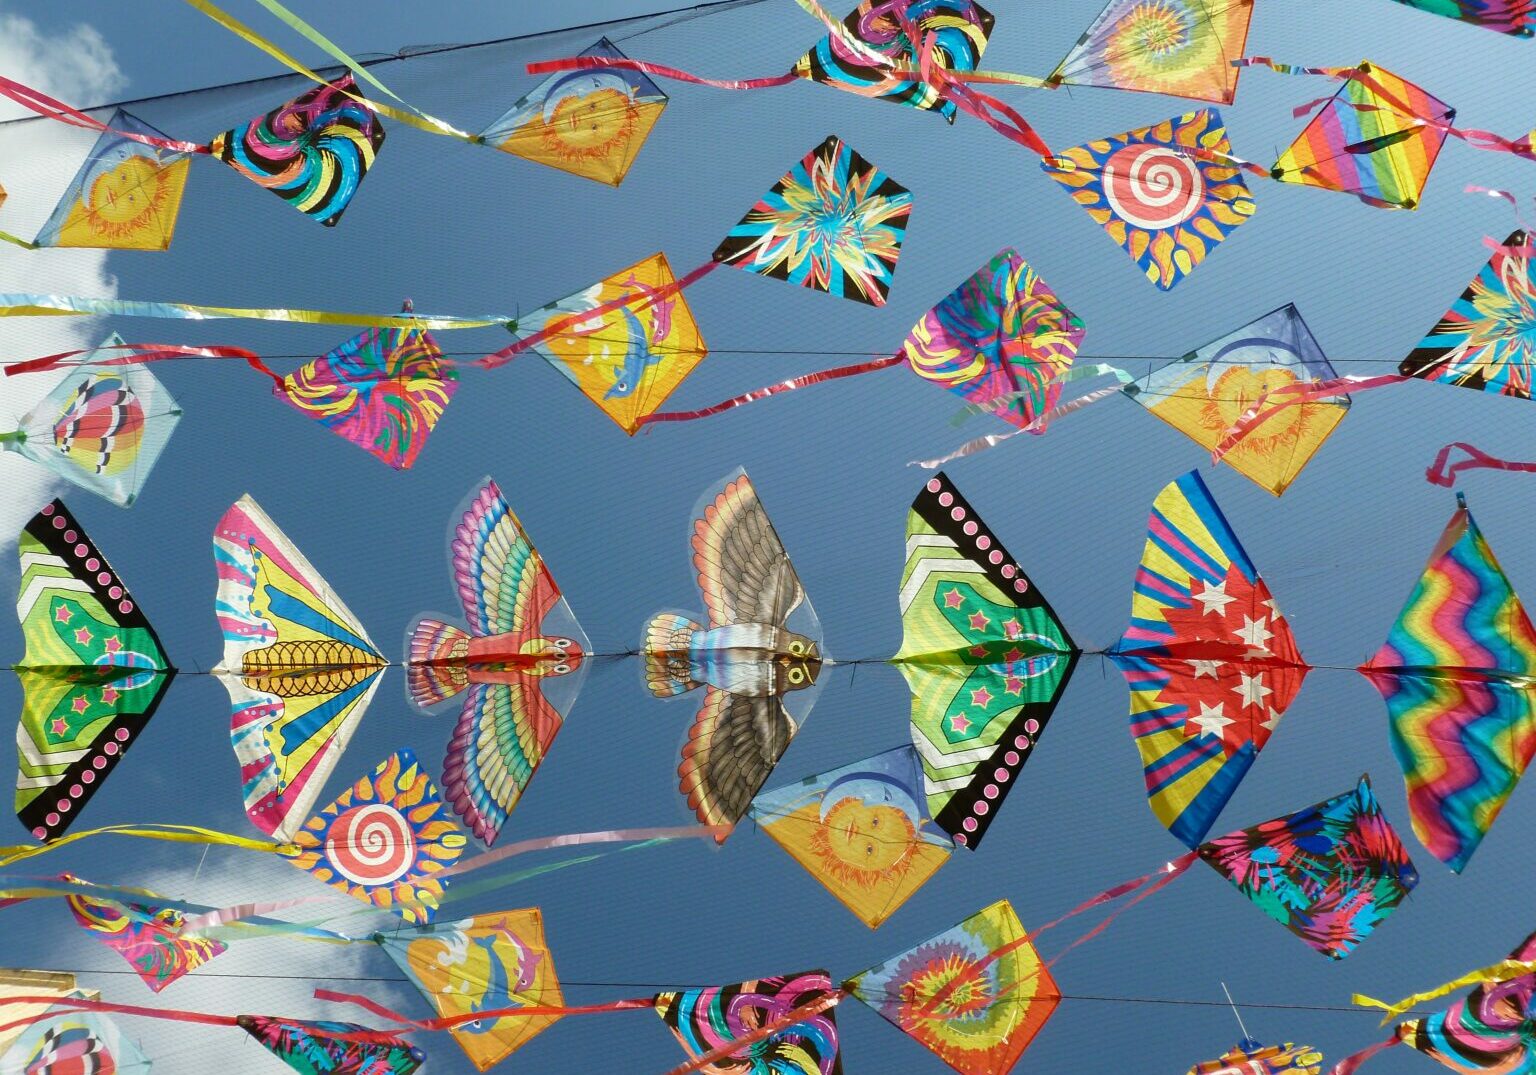 A photograph of lots of brightly coloured kites.